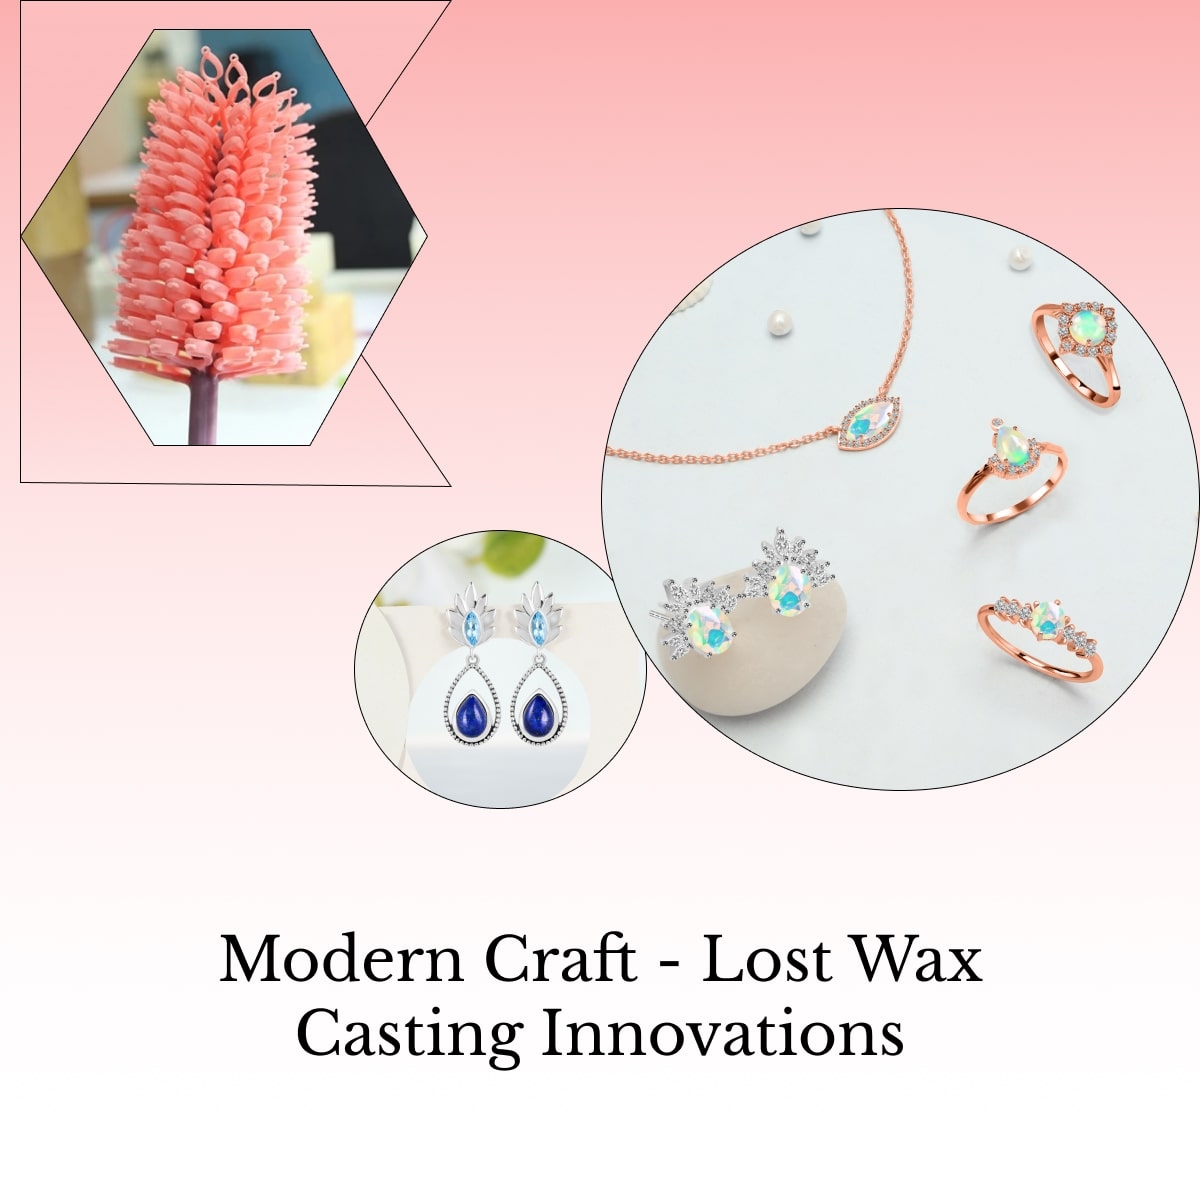 Lost-Wax Casting in the 21st Century: How Digital Design and 3D Printing Augment the Casting Process